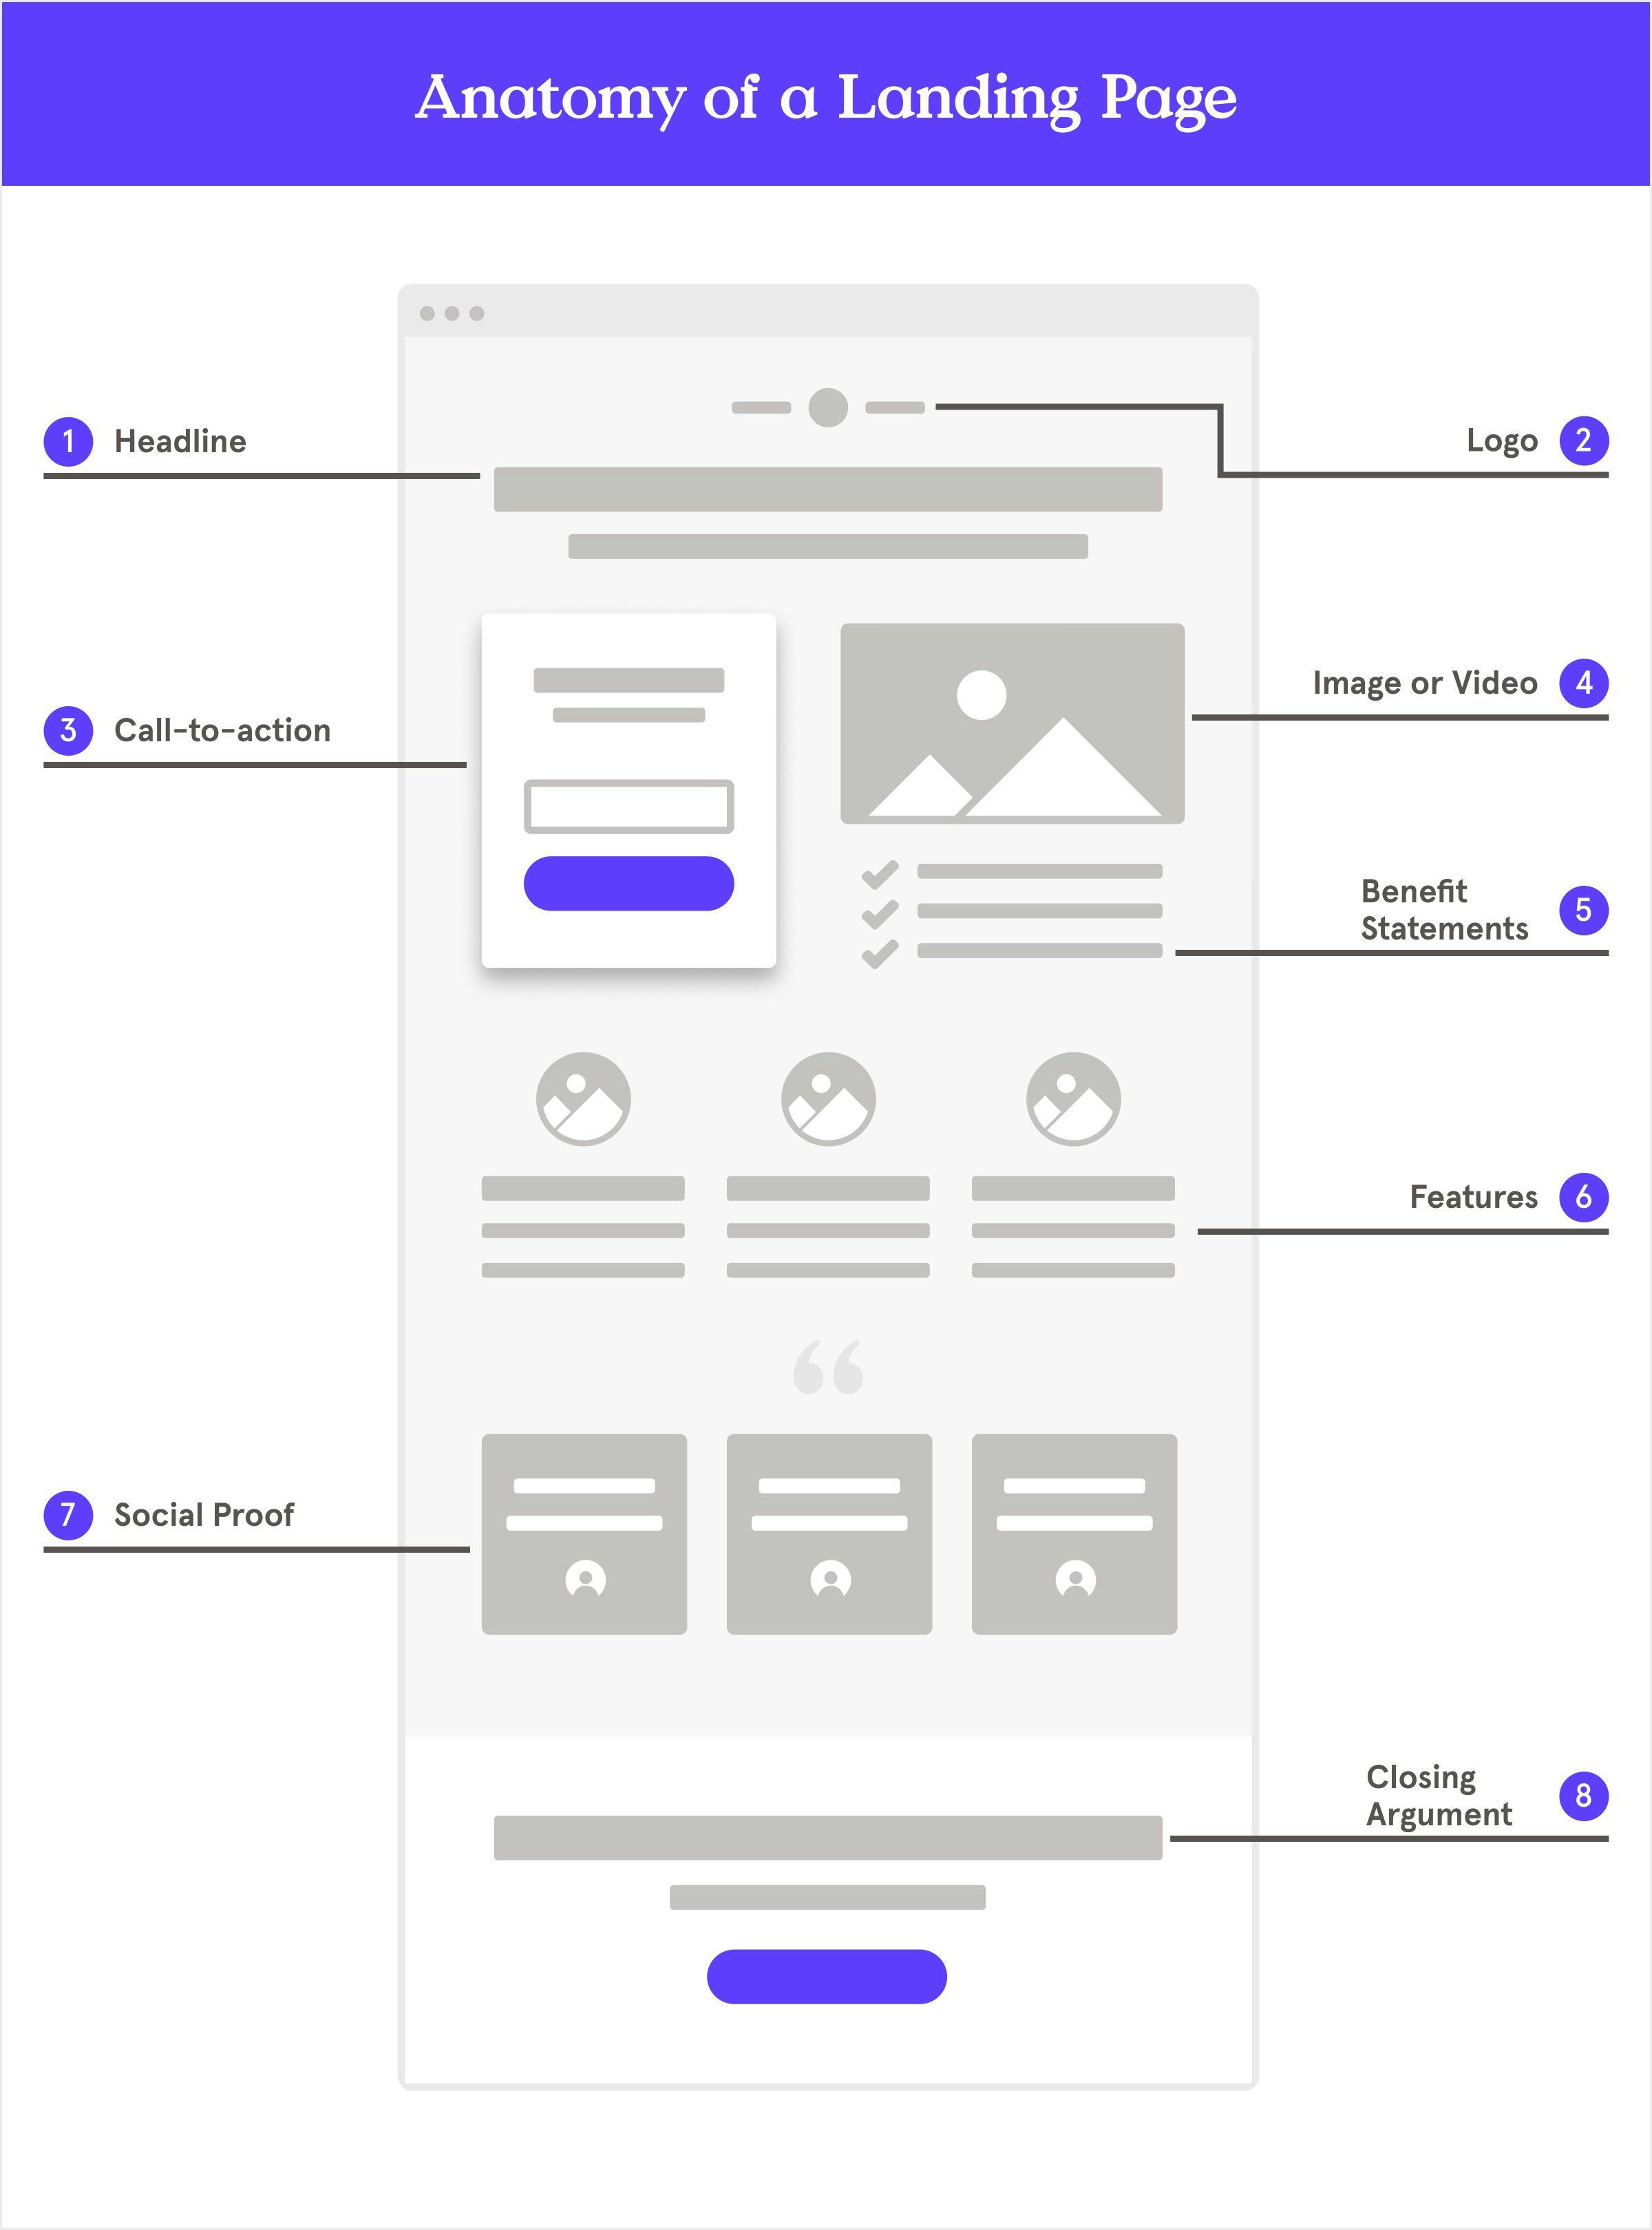 The anatomy of a landing page